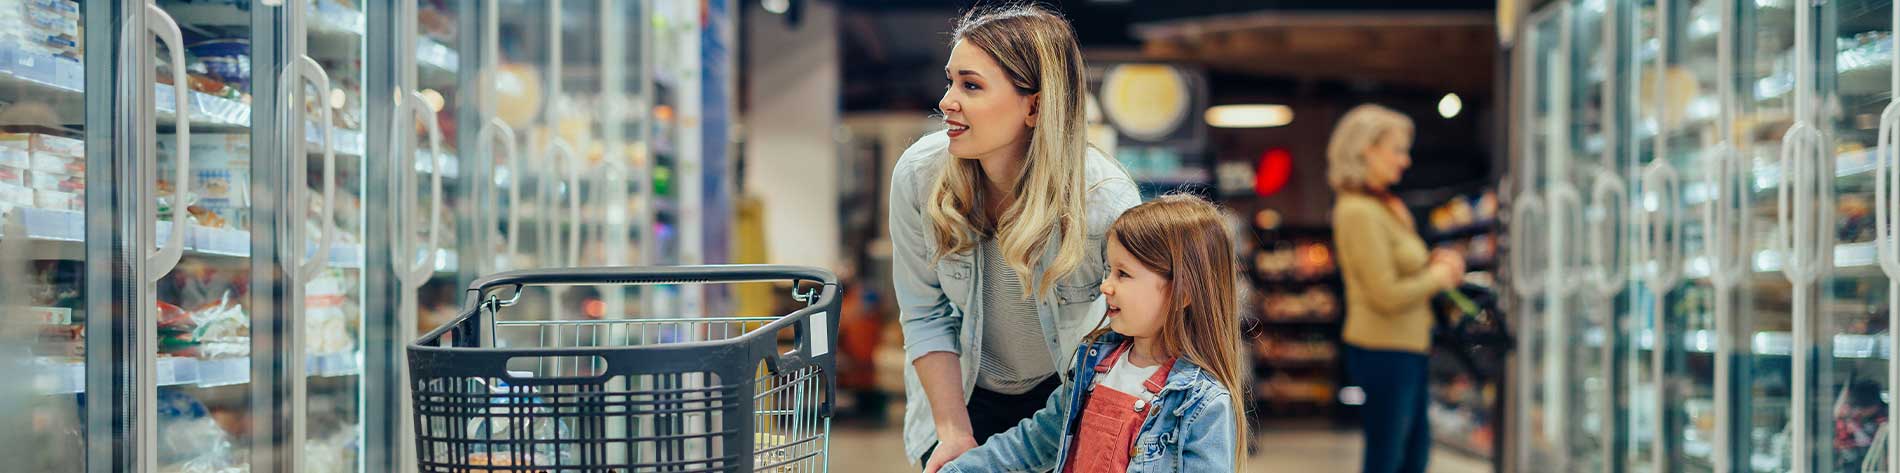 Woman and child in food aisle.